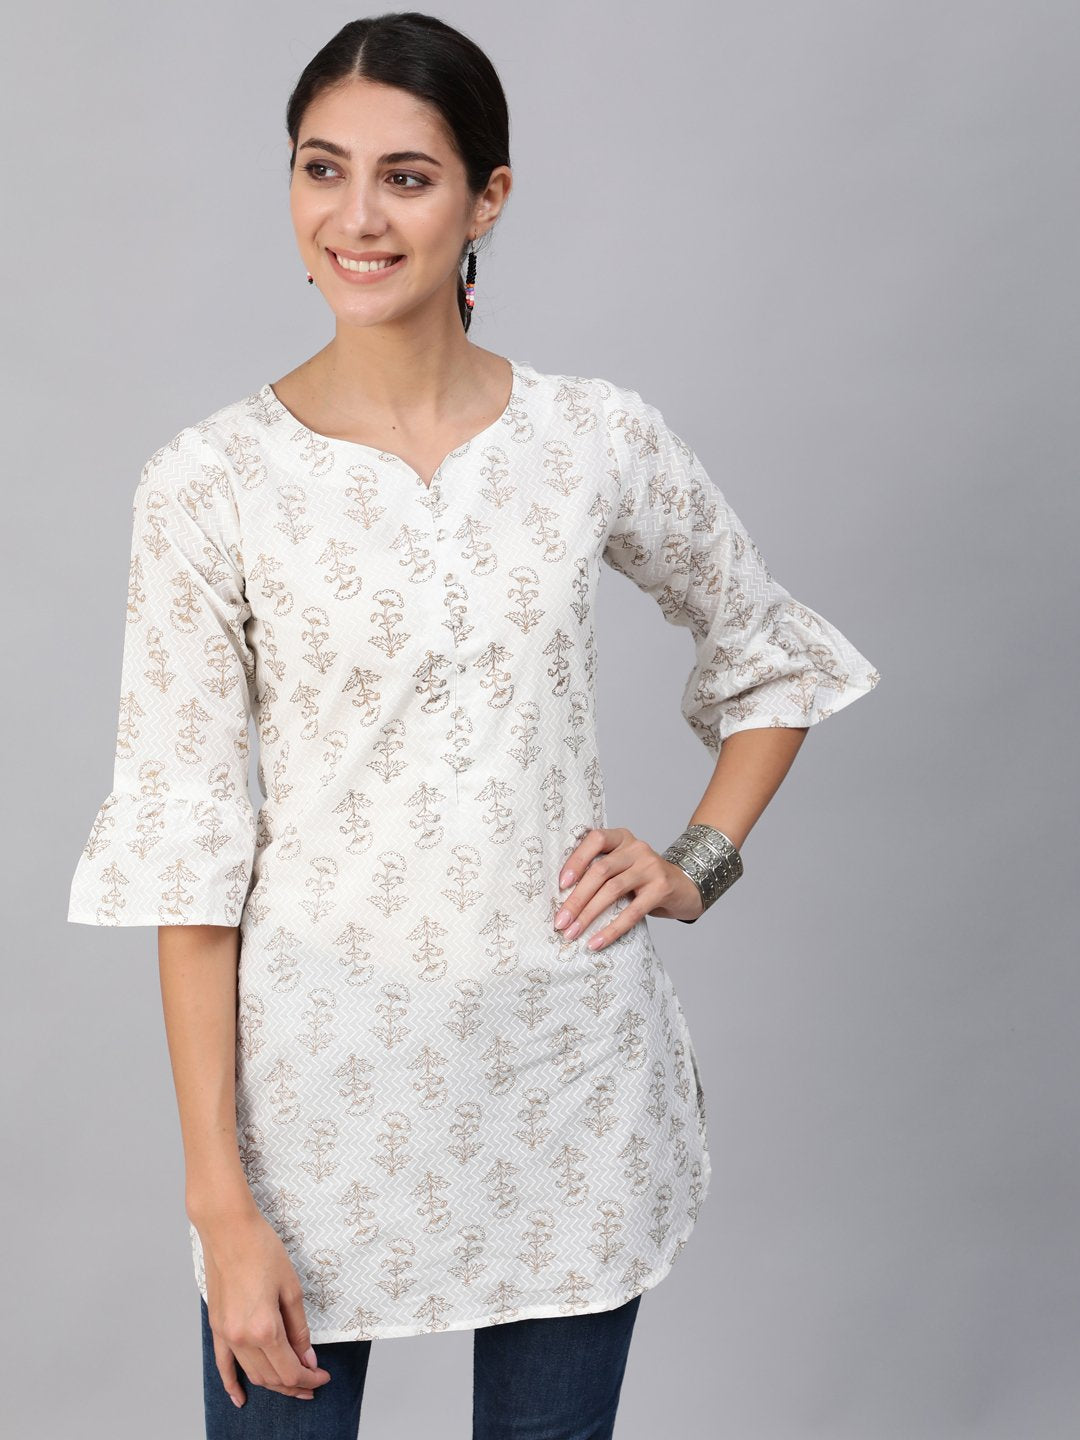 Women's Off-White & Gold Printed Tunic With Three Quarter Sleeves - Nayo Clothing